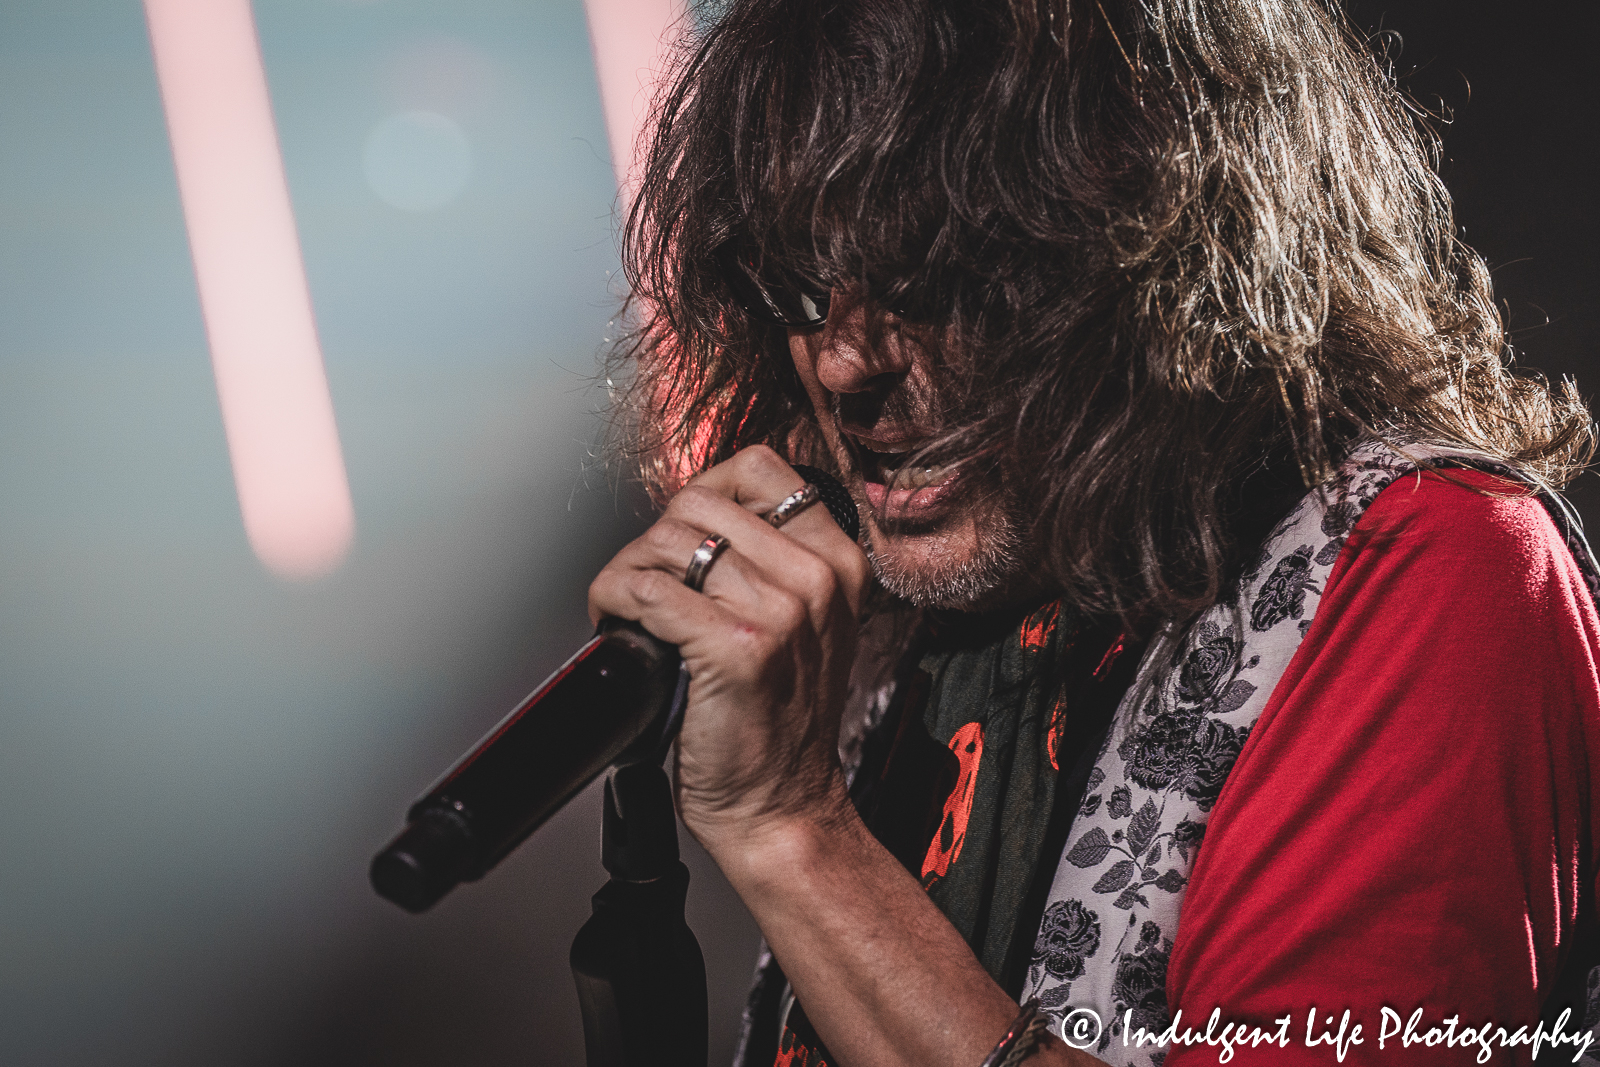 Frontman Kelly Hansen of Foreigner singing "Cold as Ice" at Kansas City's Starlight Theatre on July 18, 2023.